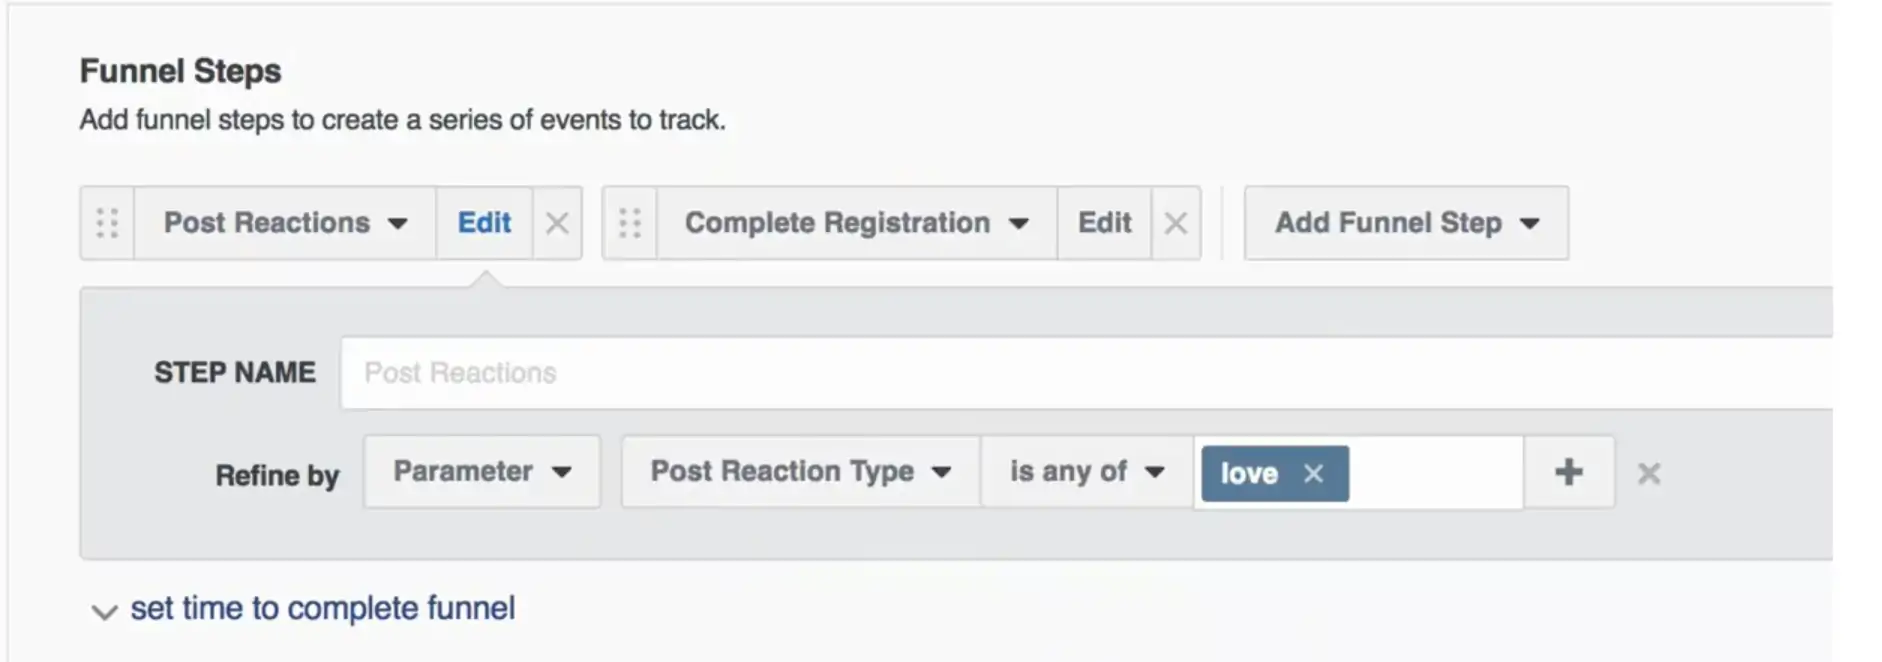 Getting Started With Facebook Analytics - Understanding And Using Facebook Analytics 8